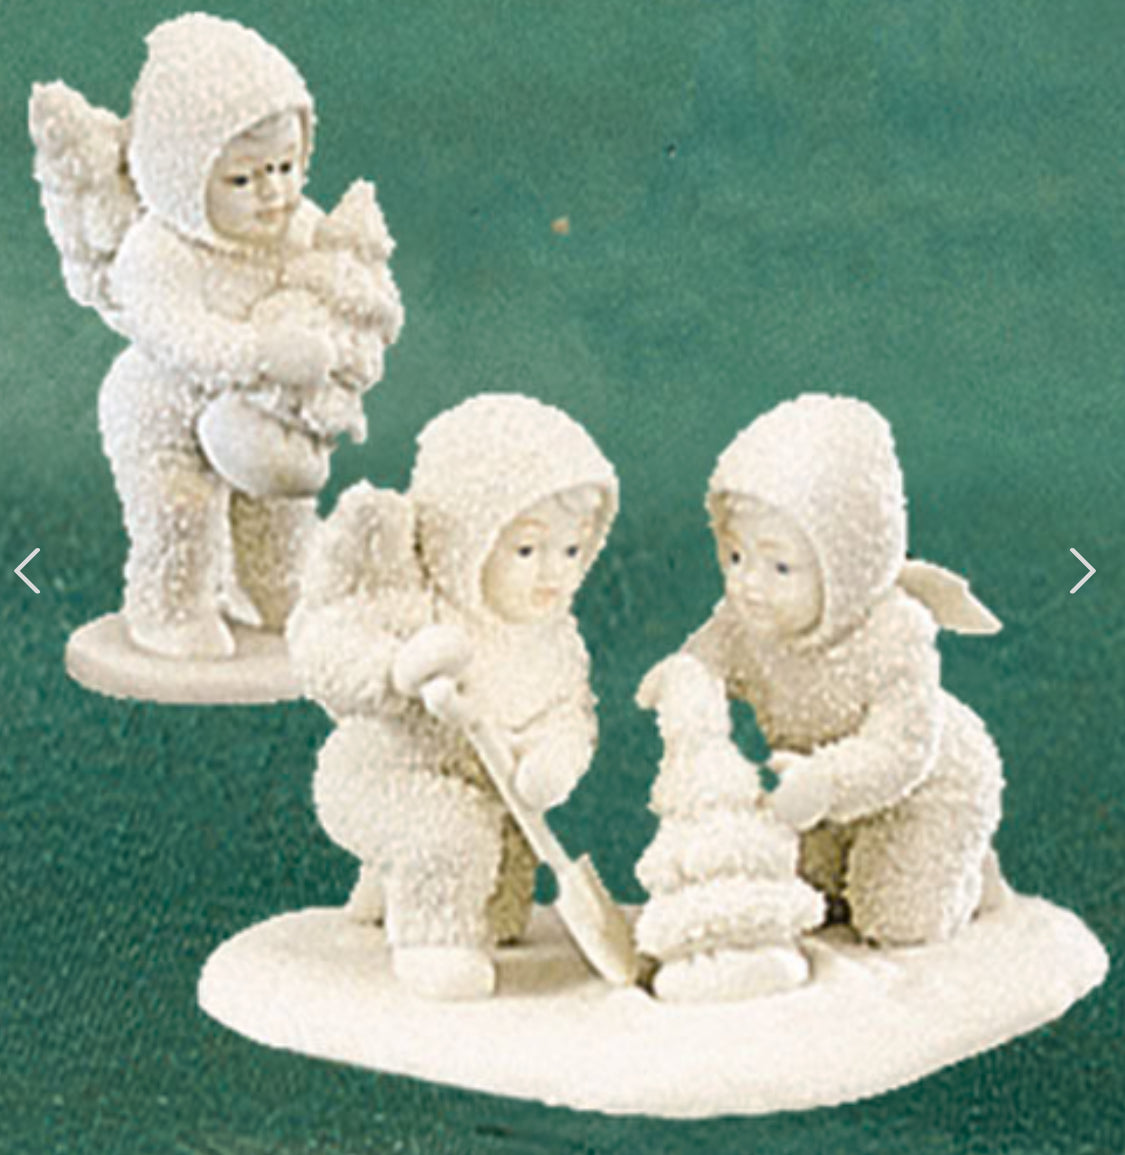 Snowbabies - We'll Plant The Starry Pines Figurine